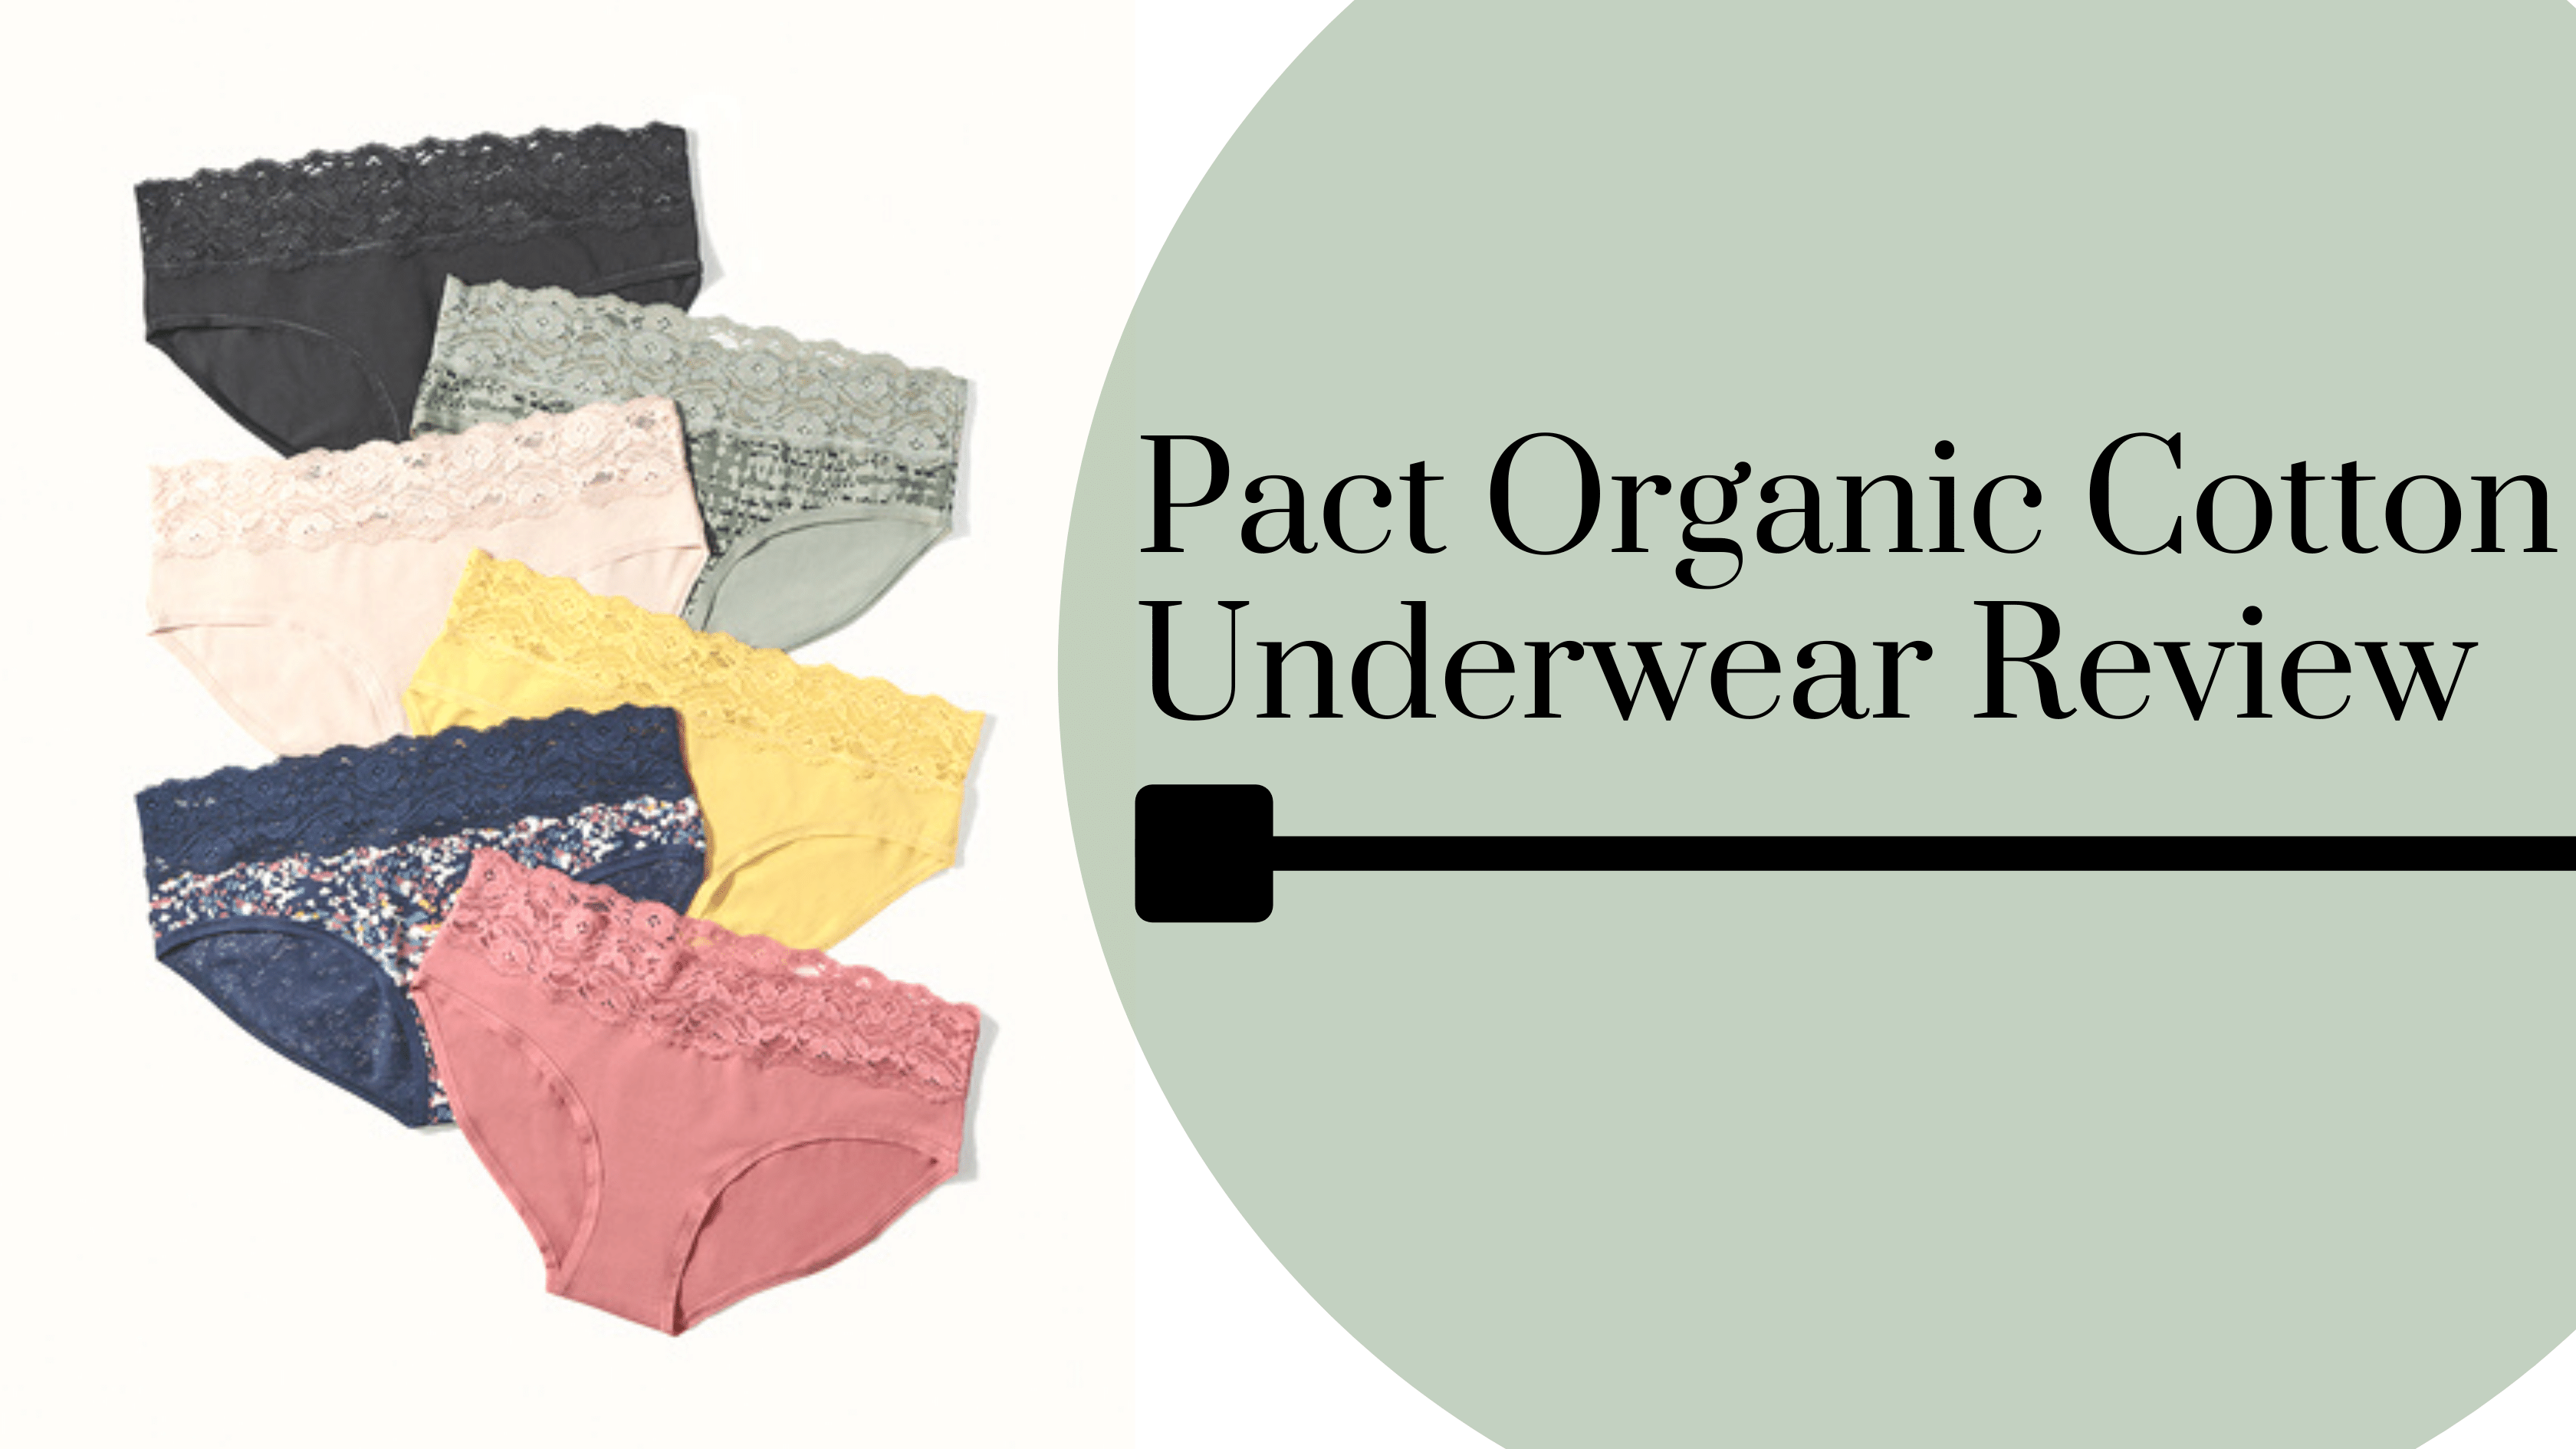 PACT Underwear Blends Organic Cotton, Nonprofits and Short Supply